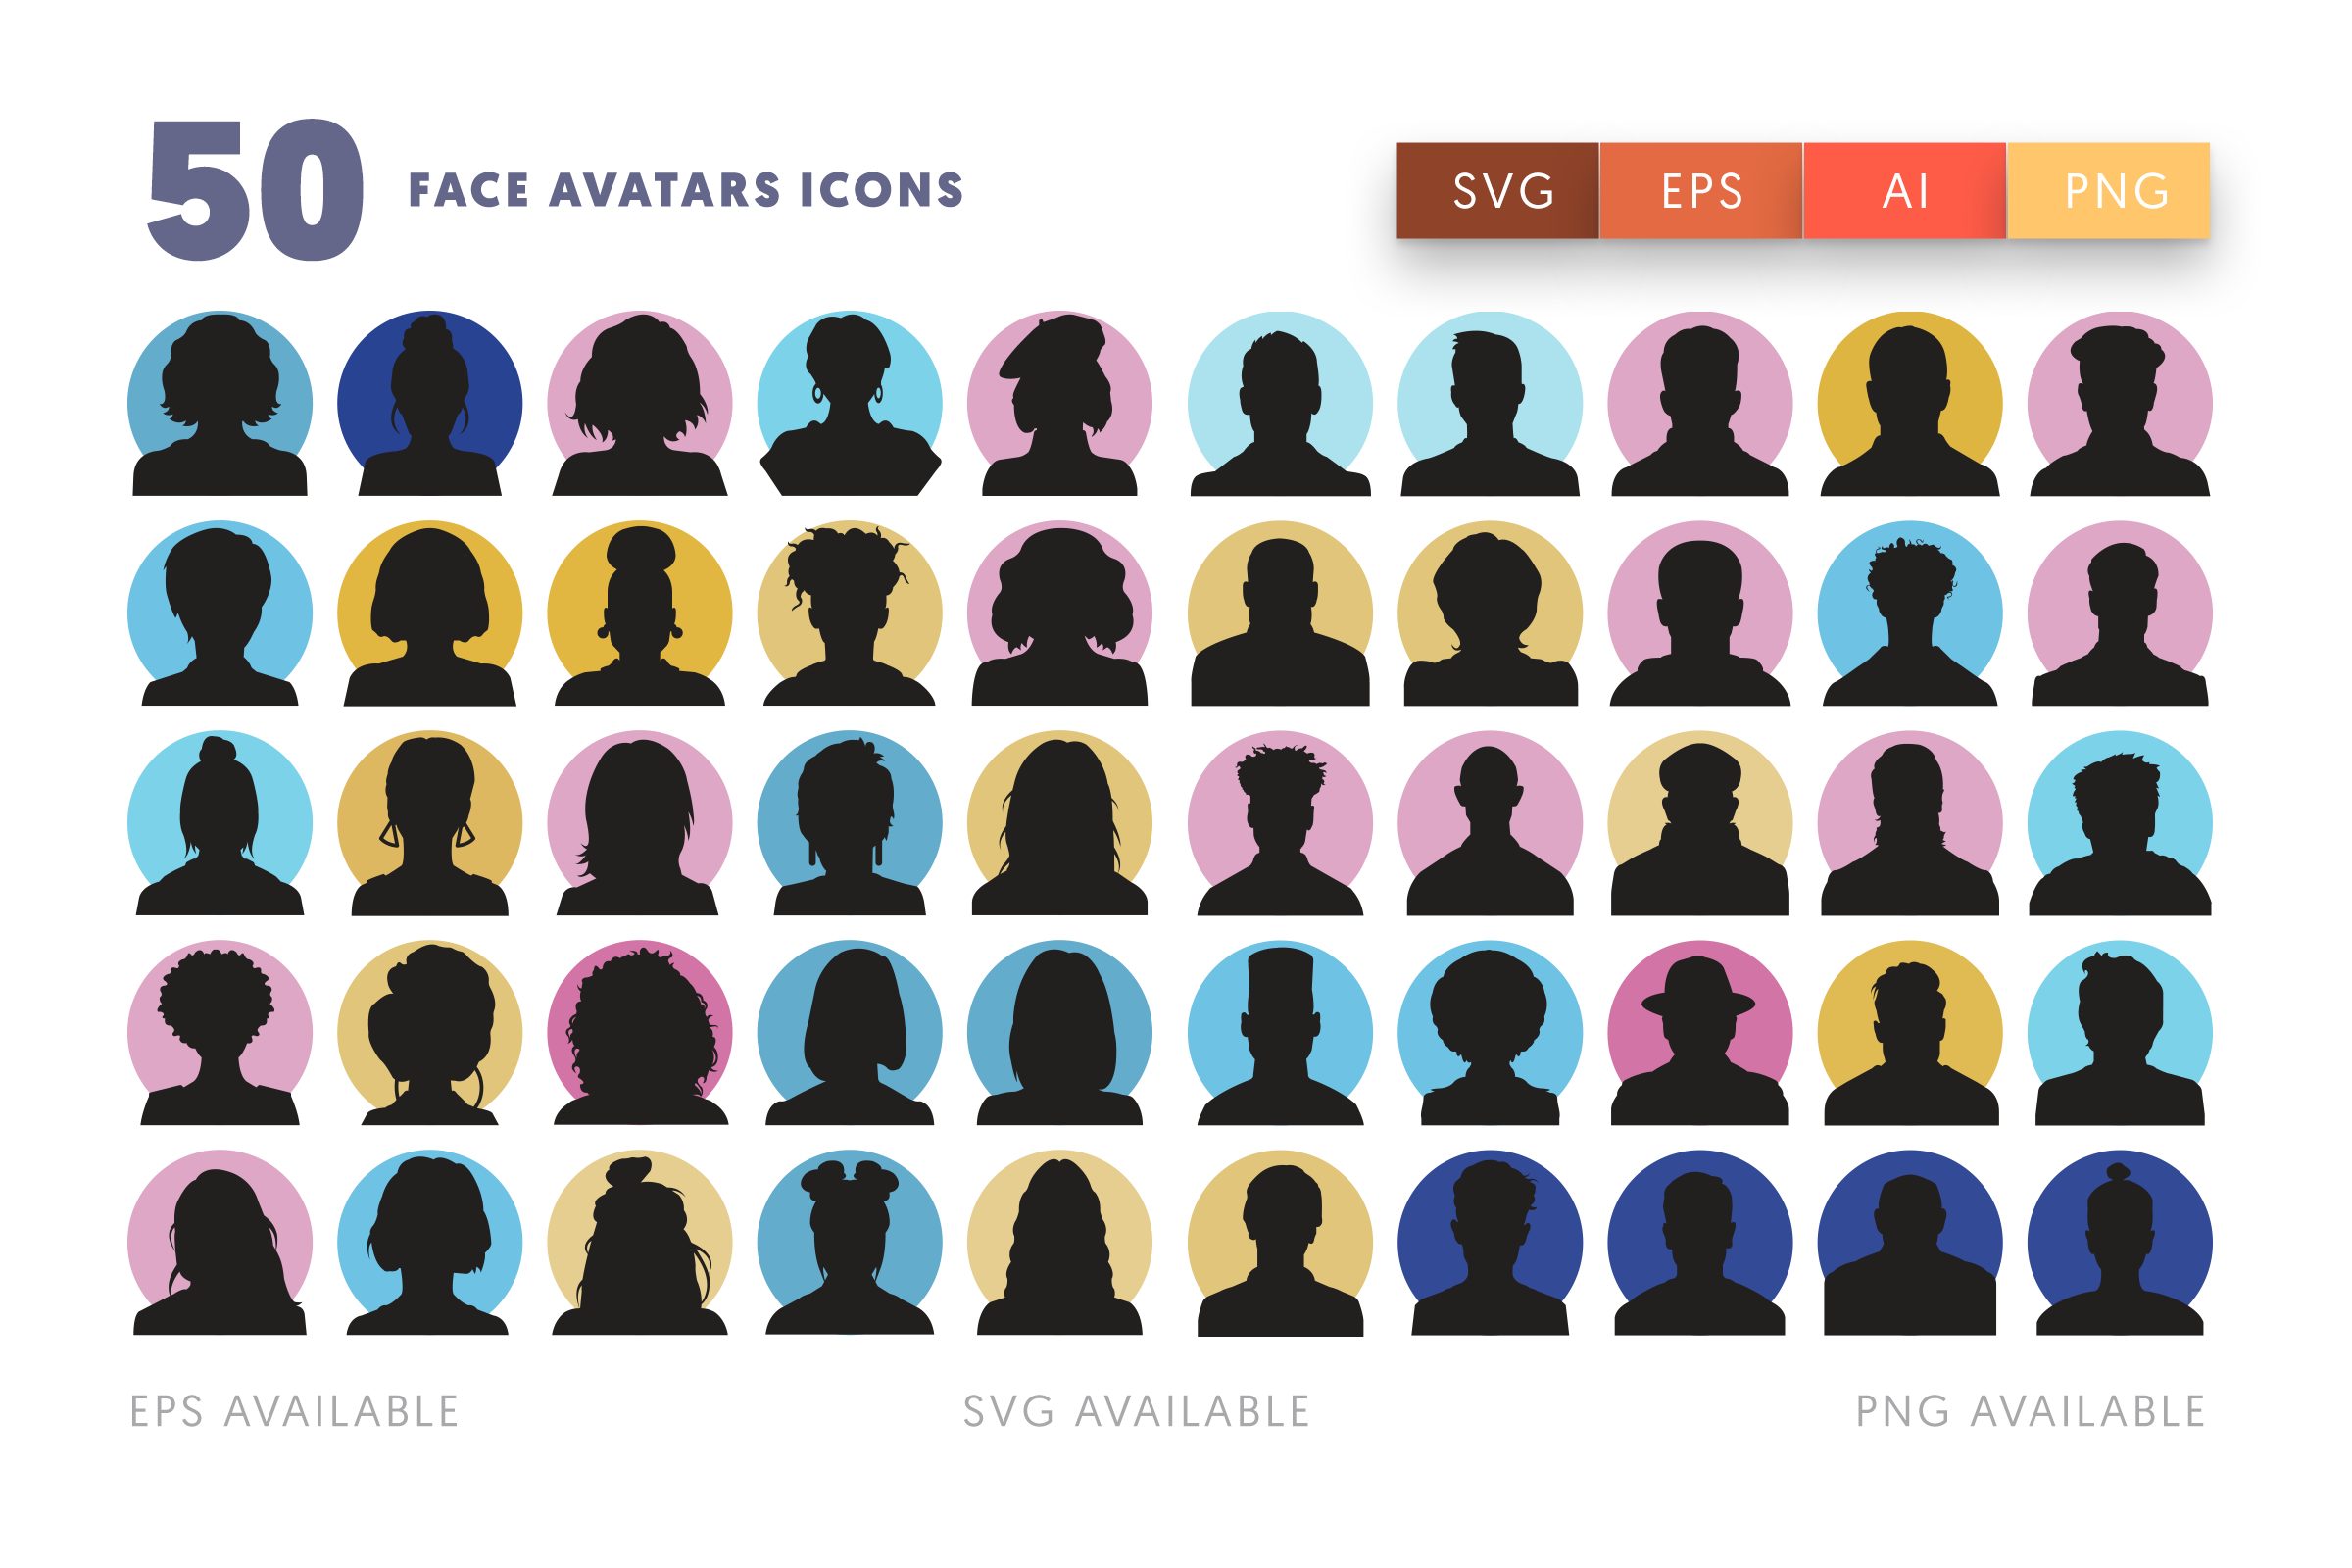 Face Avatars icons png/svg/eps